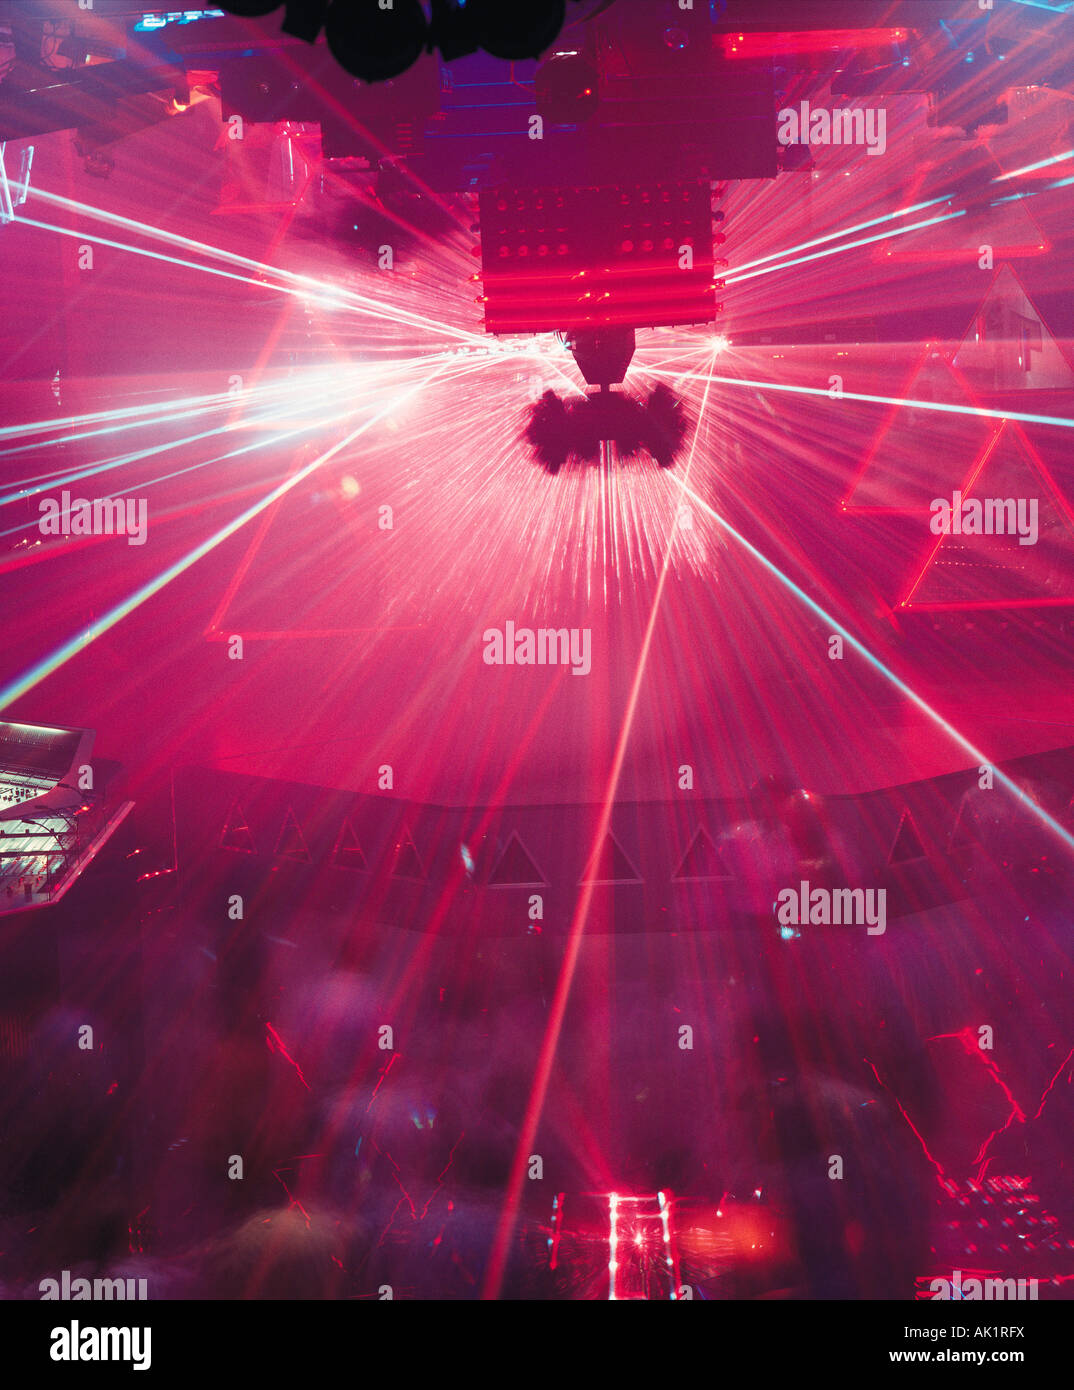 England. London. Laser light show and people dancing at The Qube Project nightclub. Stock Photo